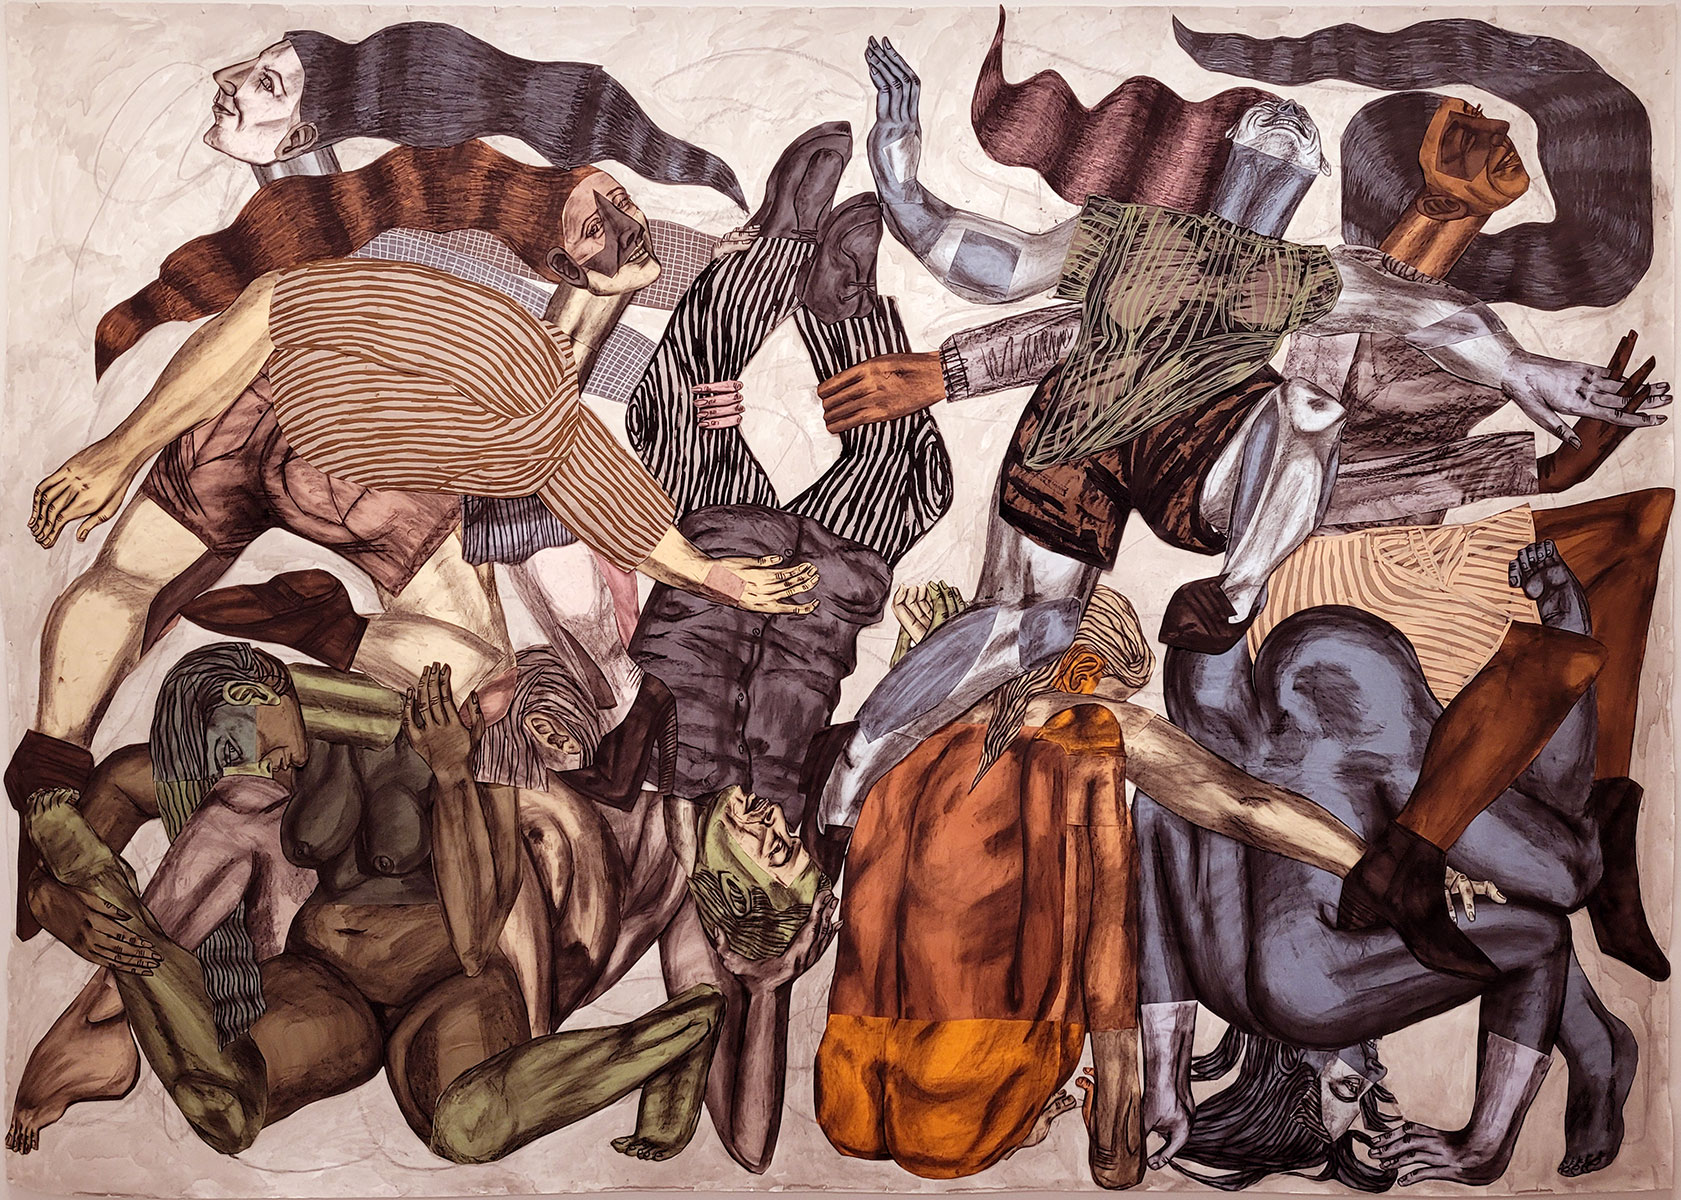 Susanna Inglada, The City, 2023, charcoal, acrylic, pastel on coloured, collaged paper, 245 x 400 cm